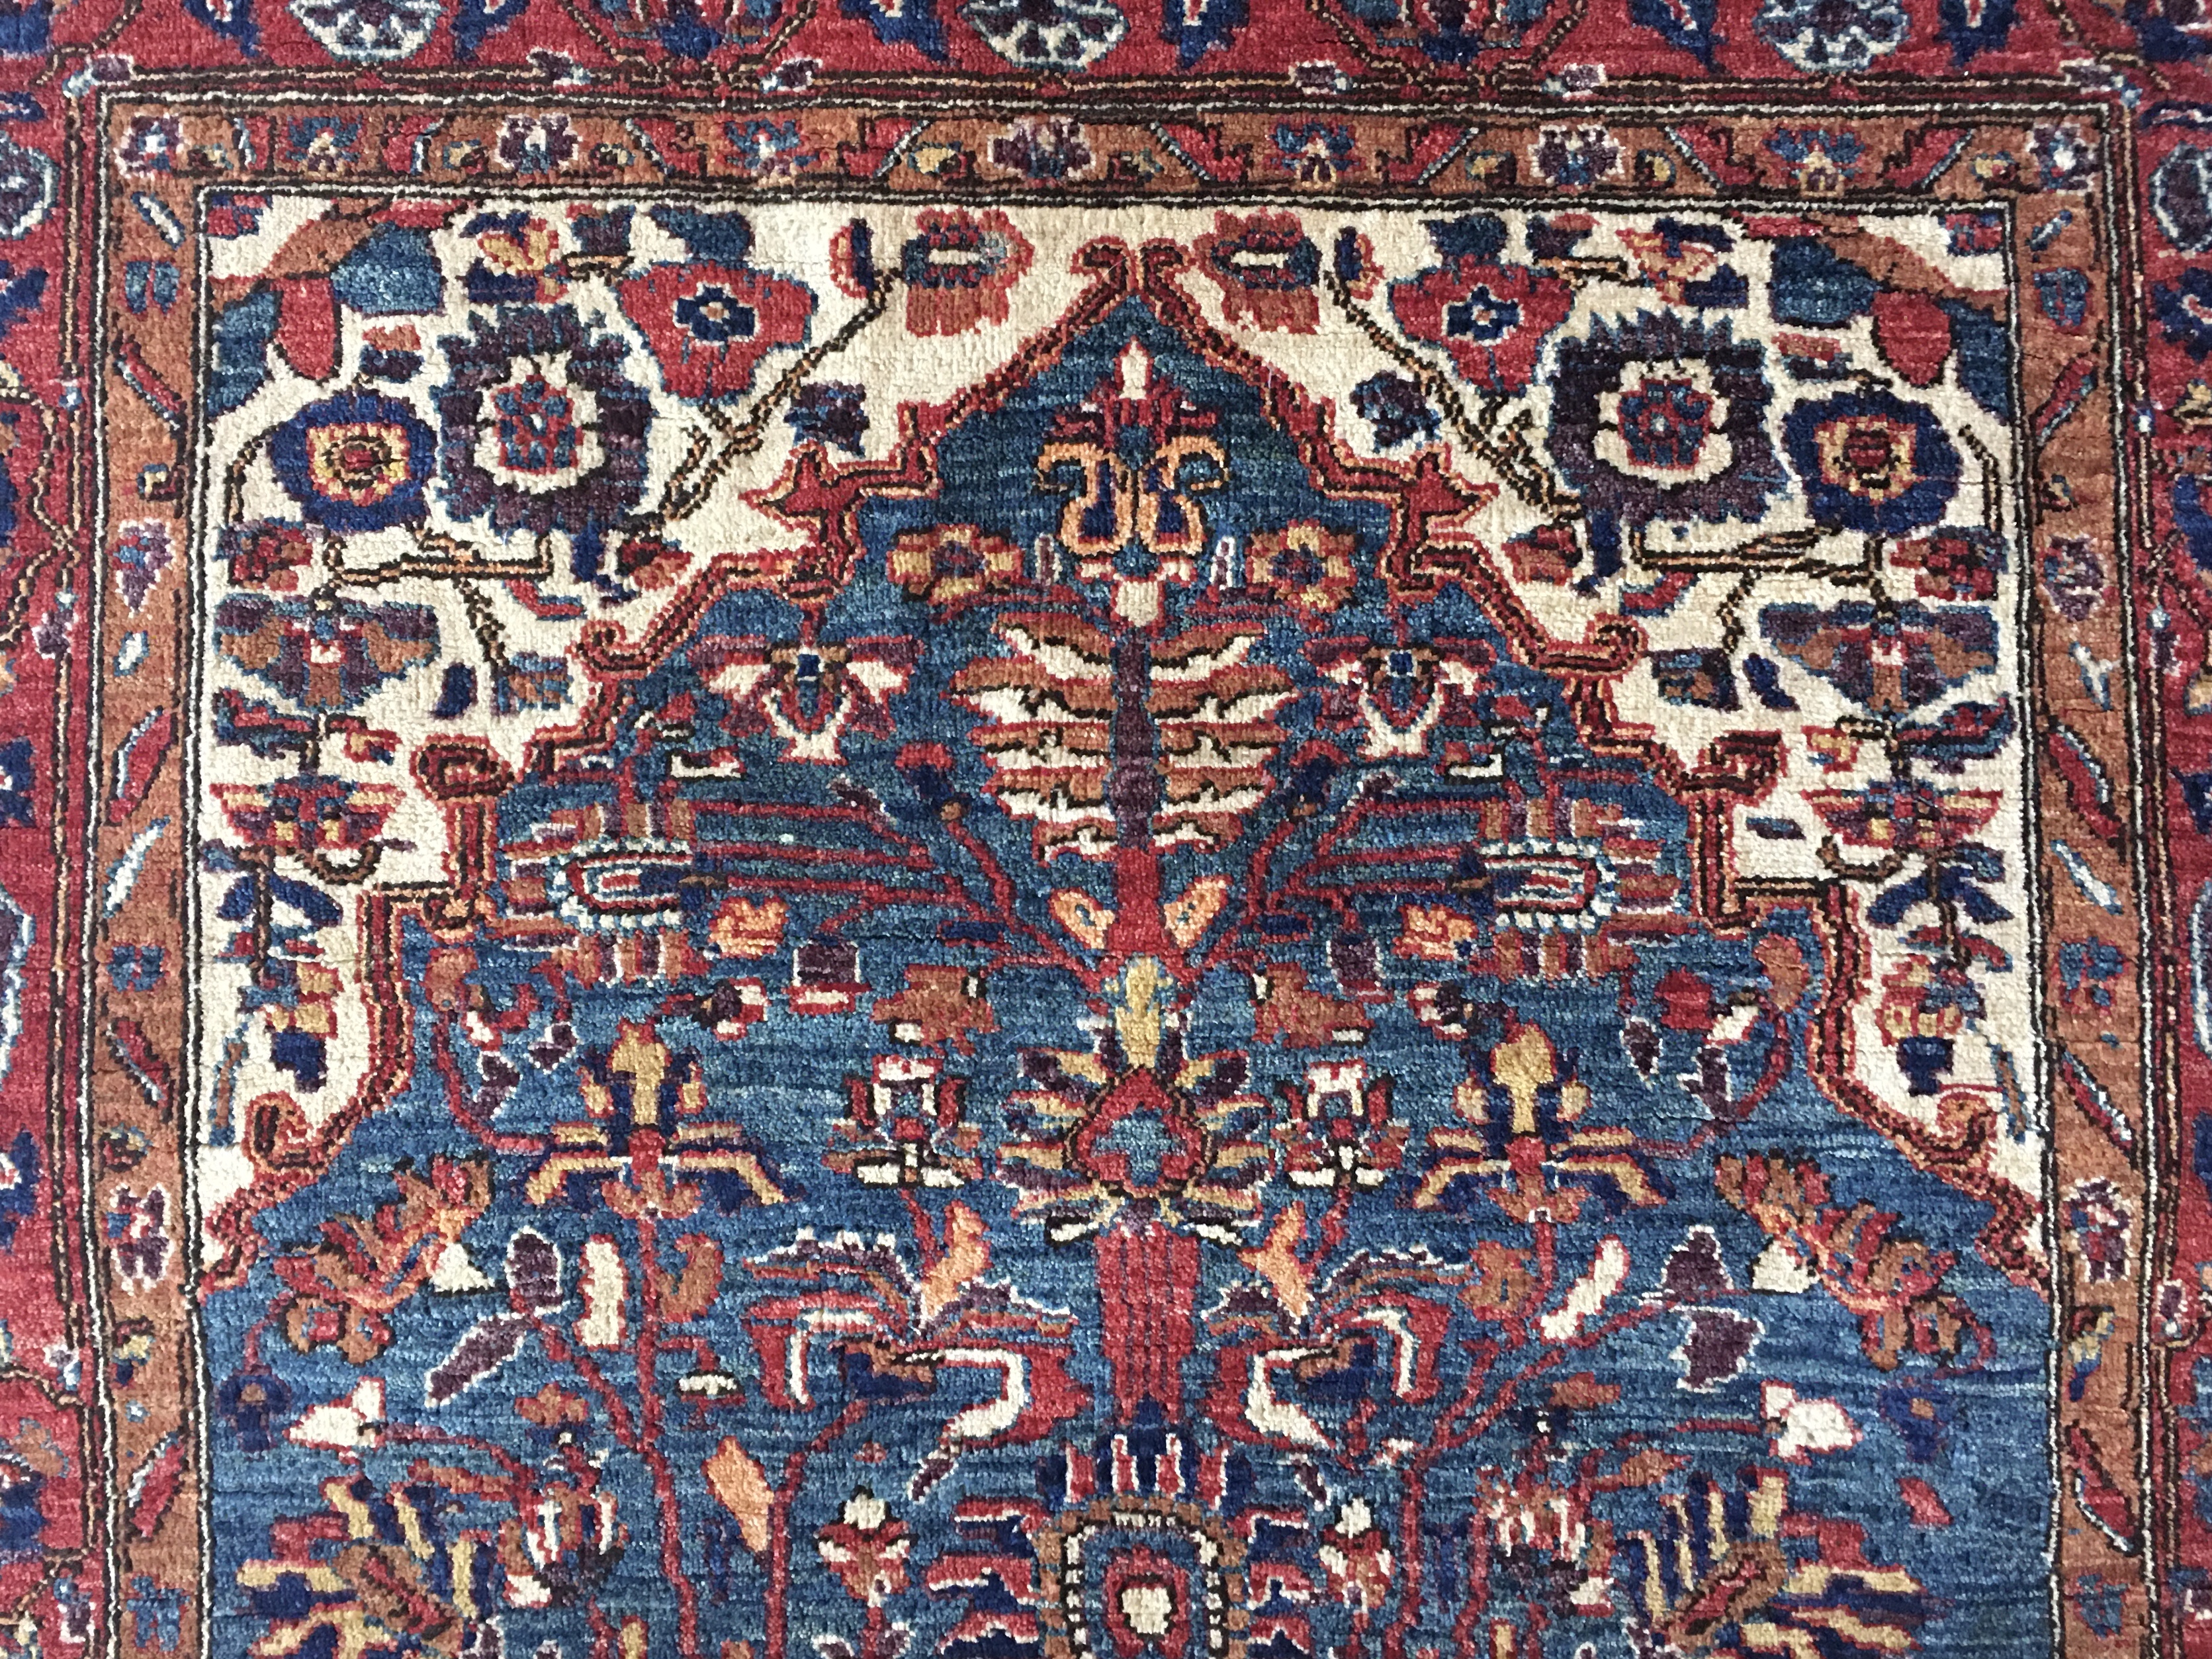 Knots are viewed from the back side of the rug